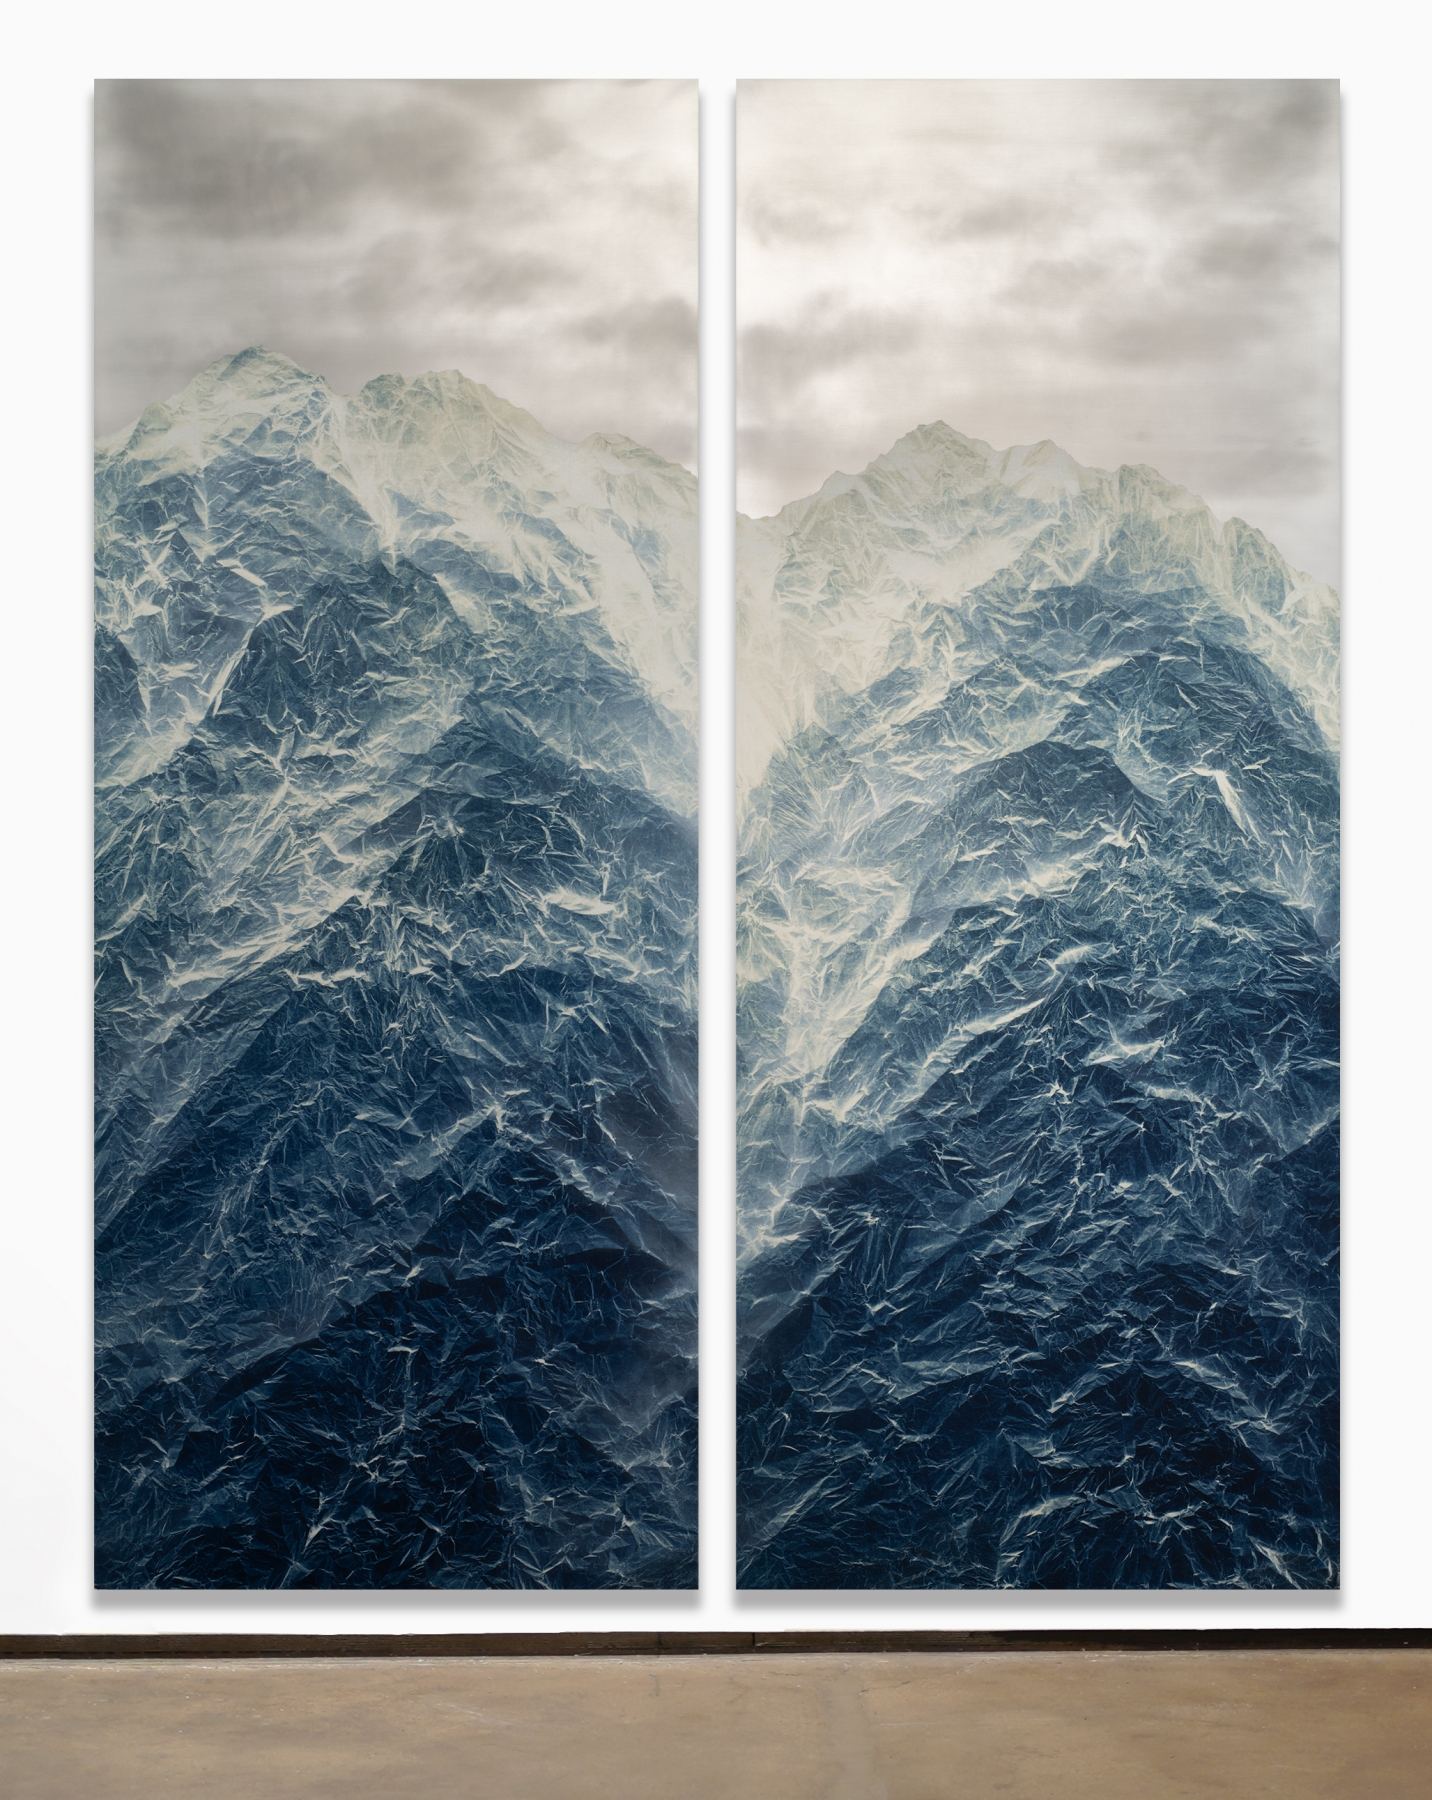 &nbsp;

Wu Chi-Tsung
Cyano-Collage 119, 2021
cyanotype photography, Xuan paper, acrylic gel, acrylic, mounted on aluminum board in two&nbsp;parts
each panel: 88 5/8 x 36 (225 x 91.4 cm)
approx. overall: 88 5/8 x 70 7/8 inches (225 x 180 cm)
(WCT-41)